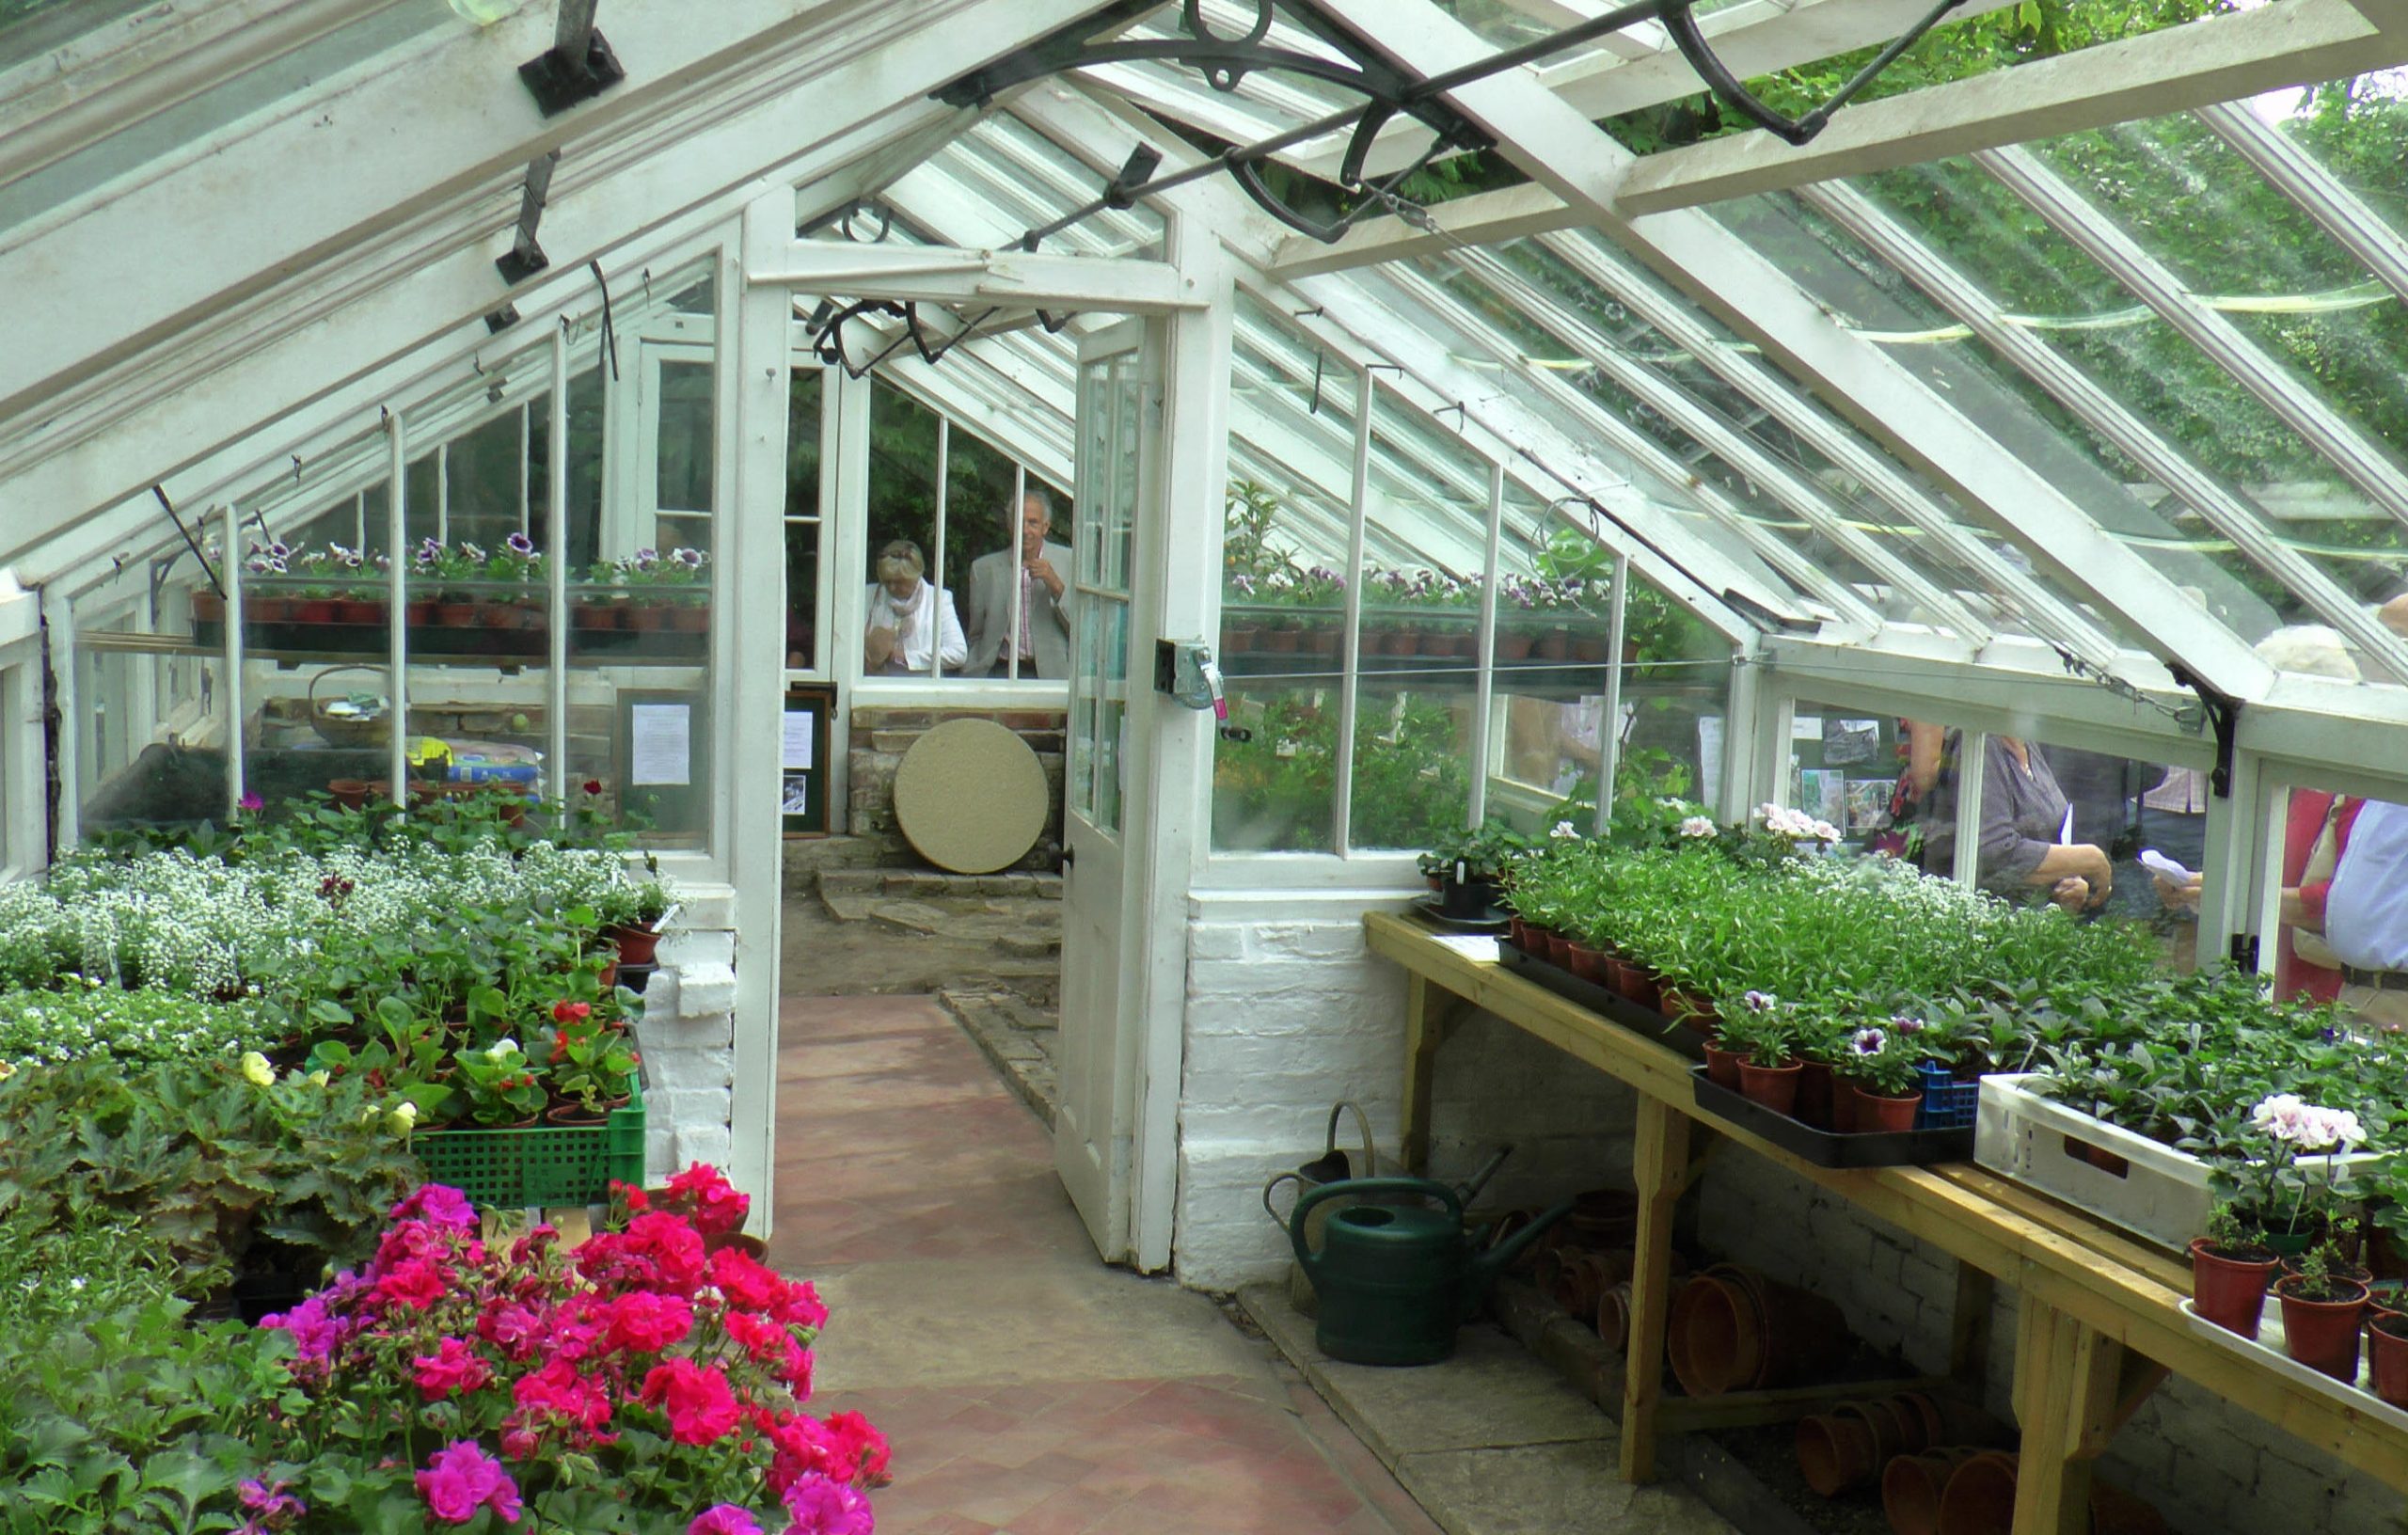 Bedding plants on benches in the glasshouse